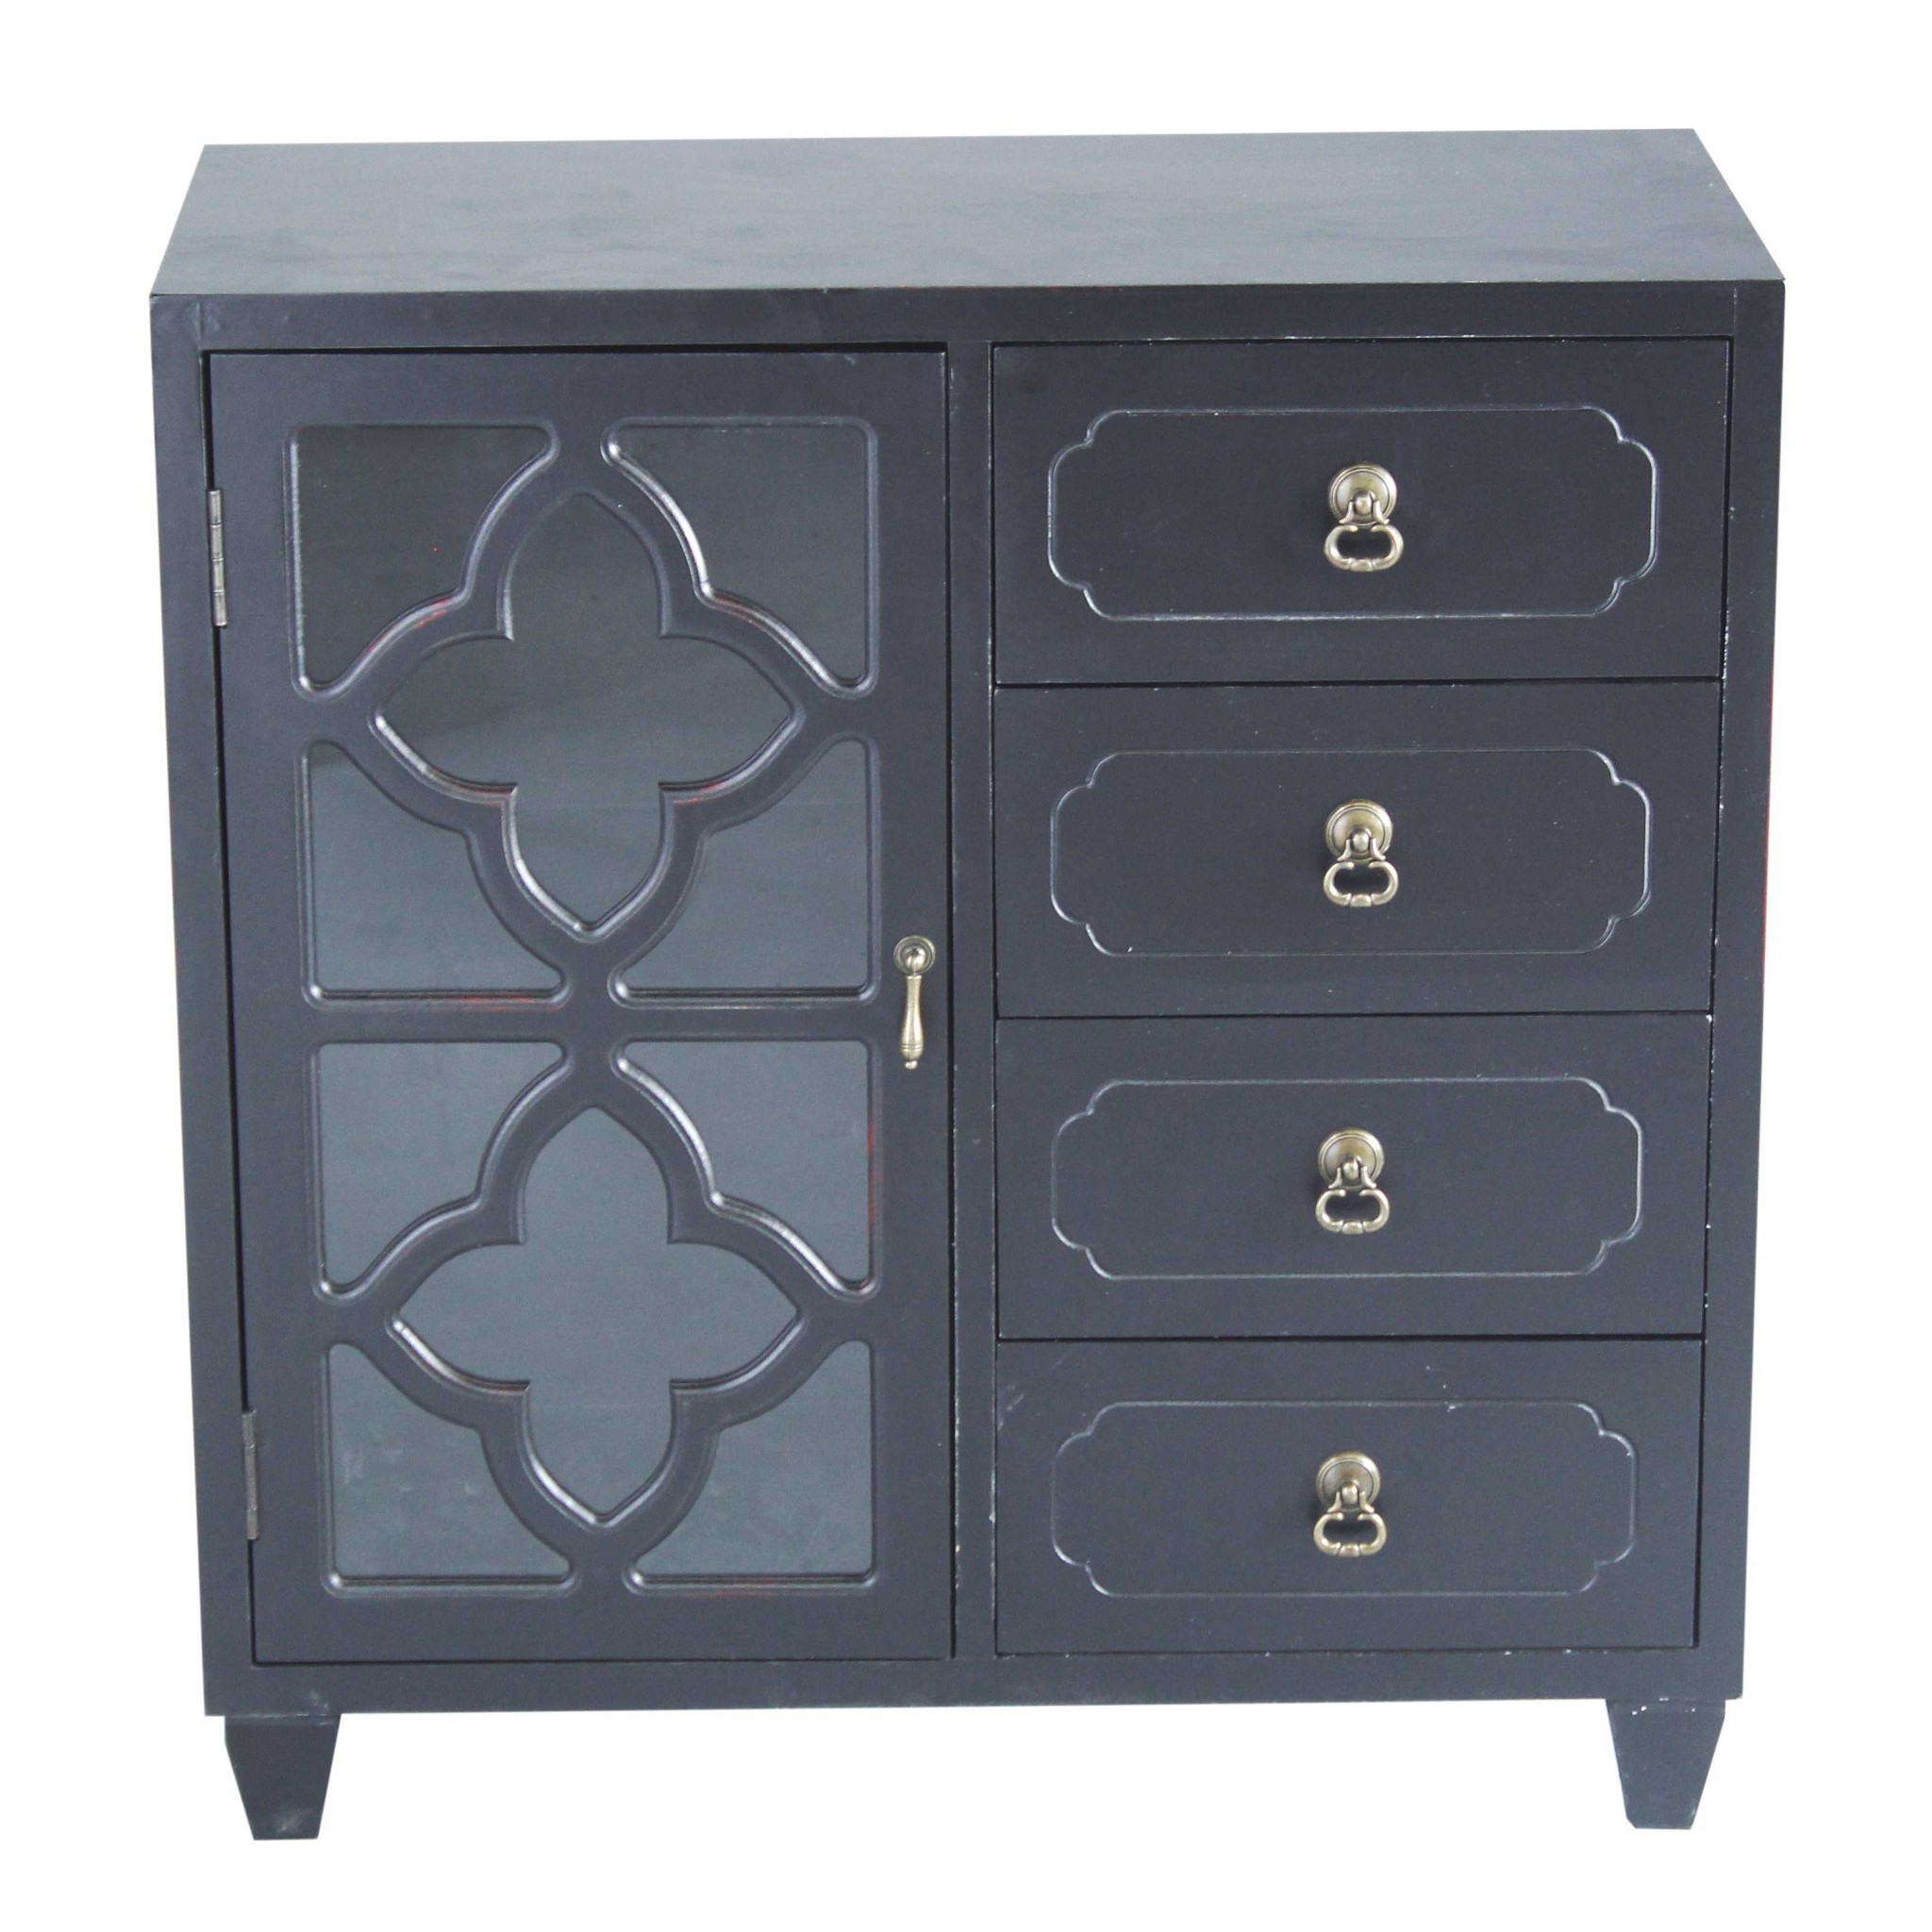 29.5" X 14" X 30.75" Black MDF Wood Clear Glass Glass Sideboard with a Door Drawers